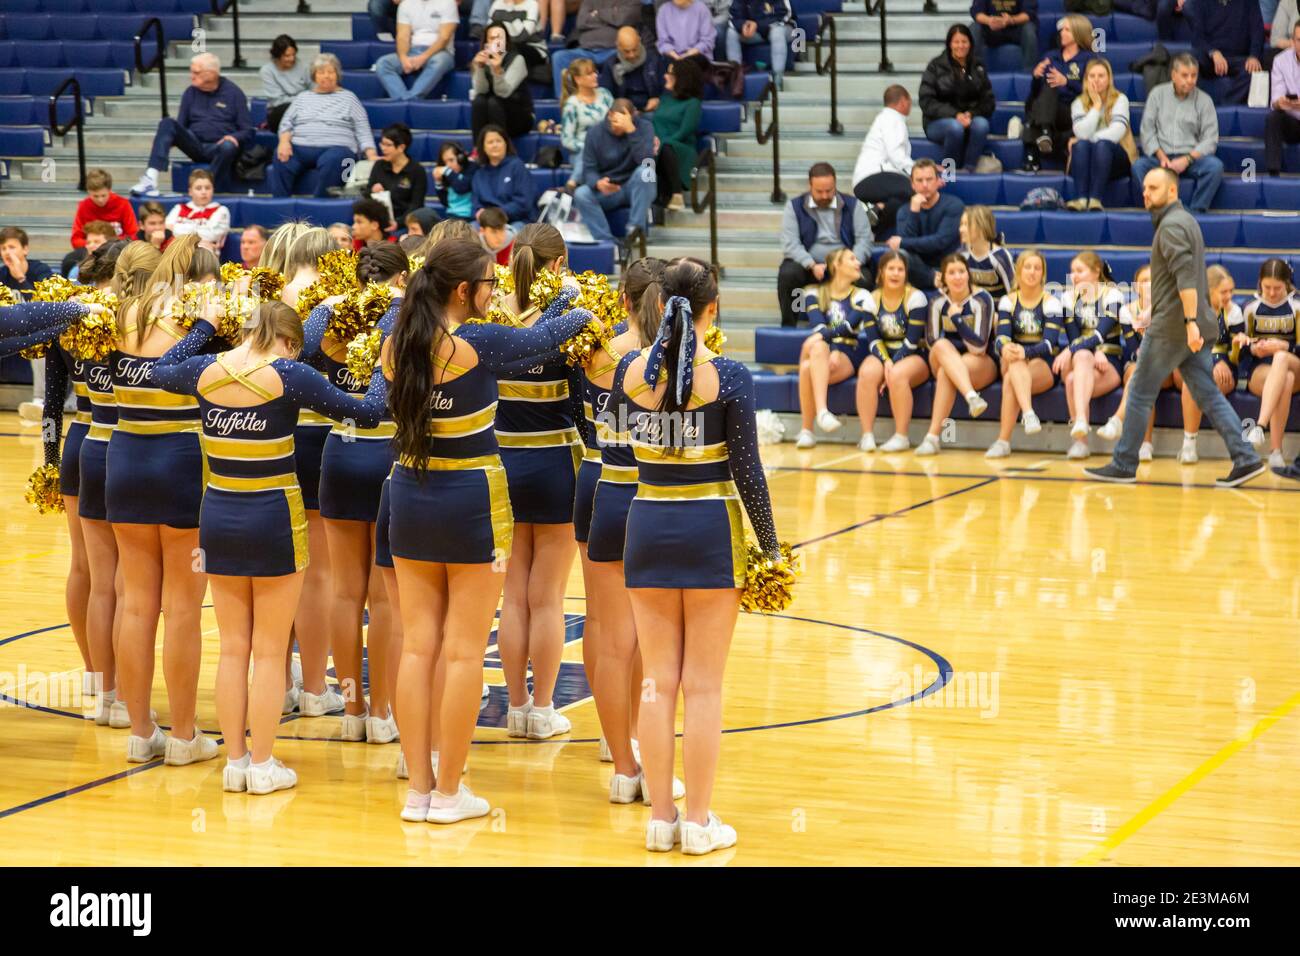 The Bishop Dwenger High School Dance Team, the Tuffettes, performs at center court in their gymnasium in Fort Wayne, Indiana, USA. Stock Photo